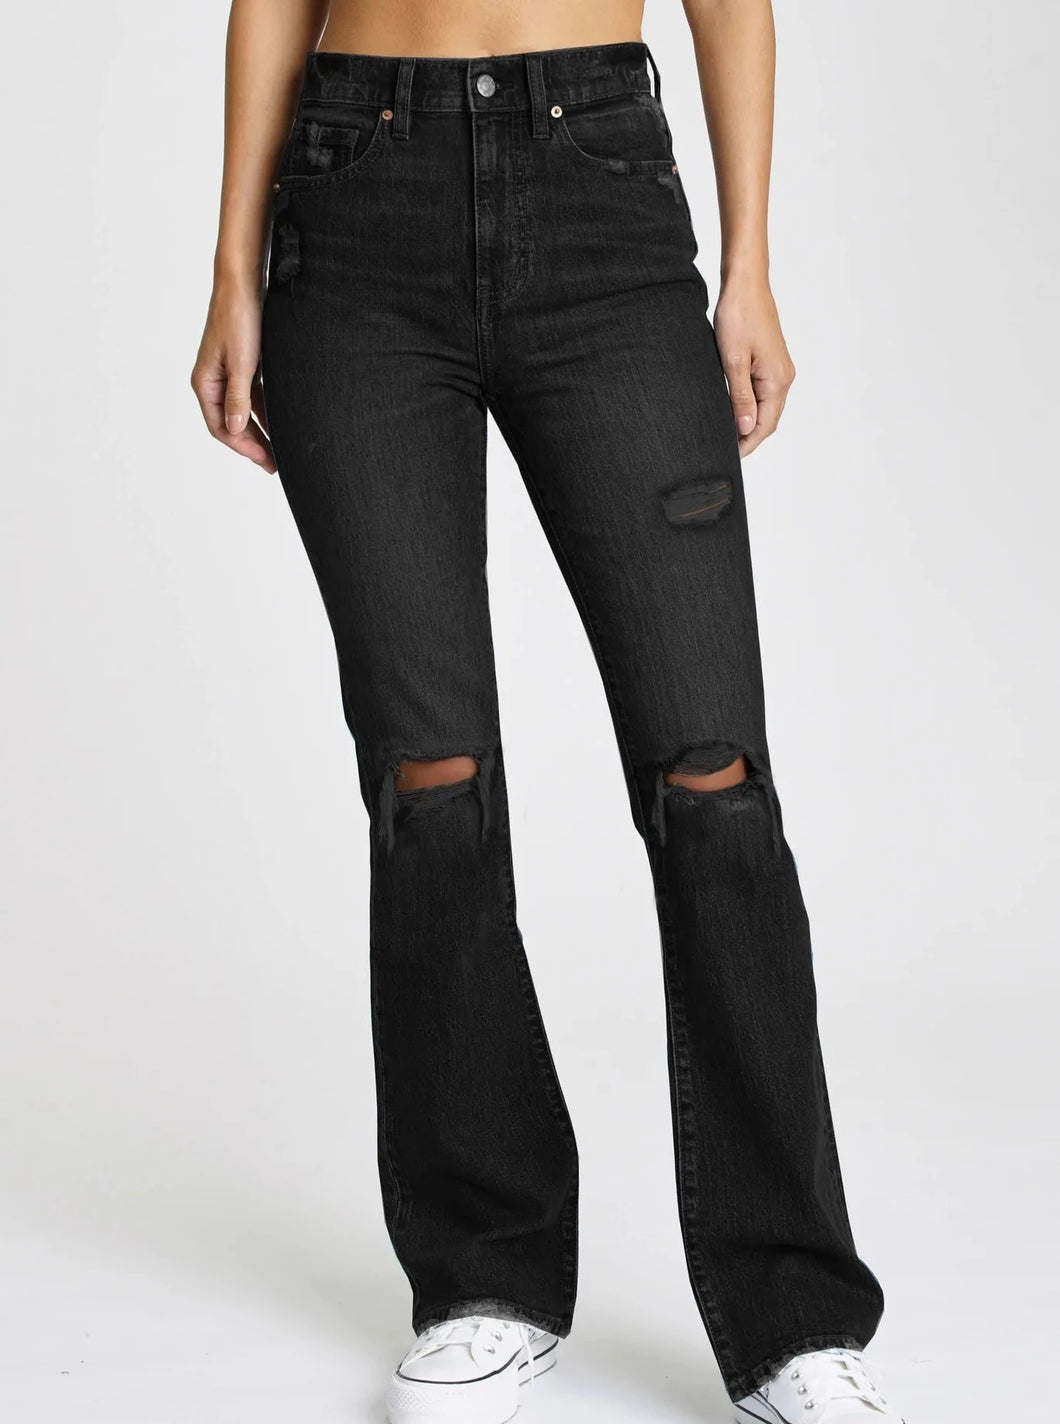 The Go-Getter is a slim high rise flare jean.  12